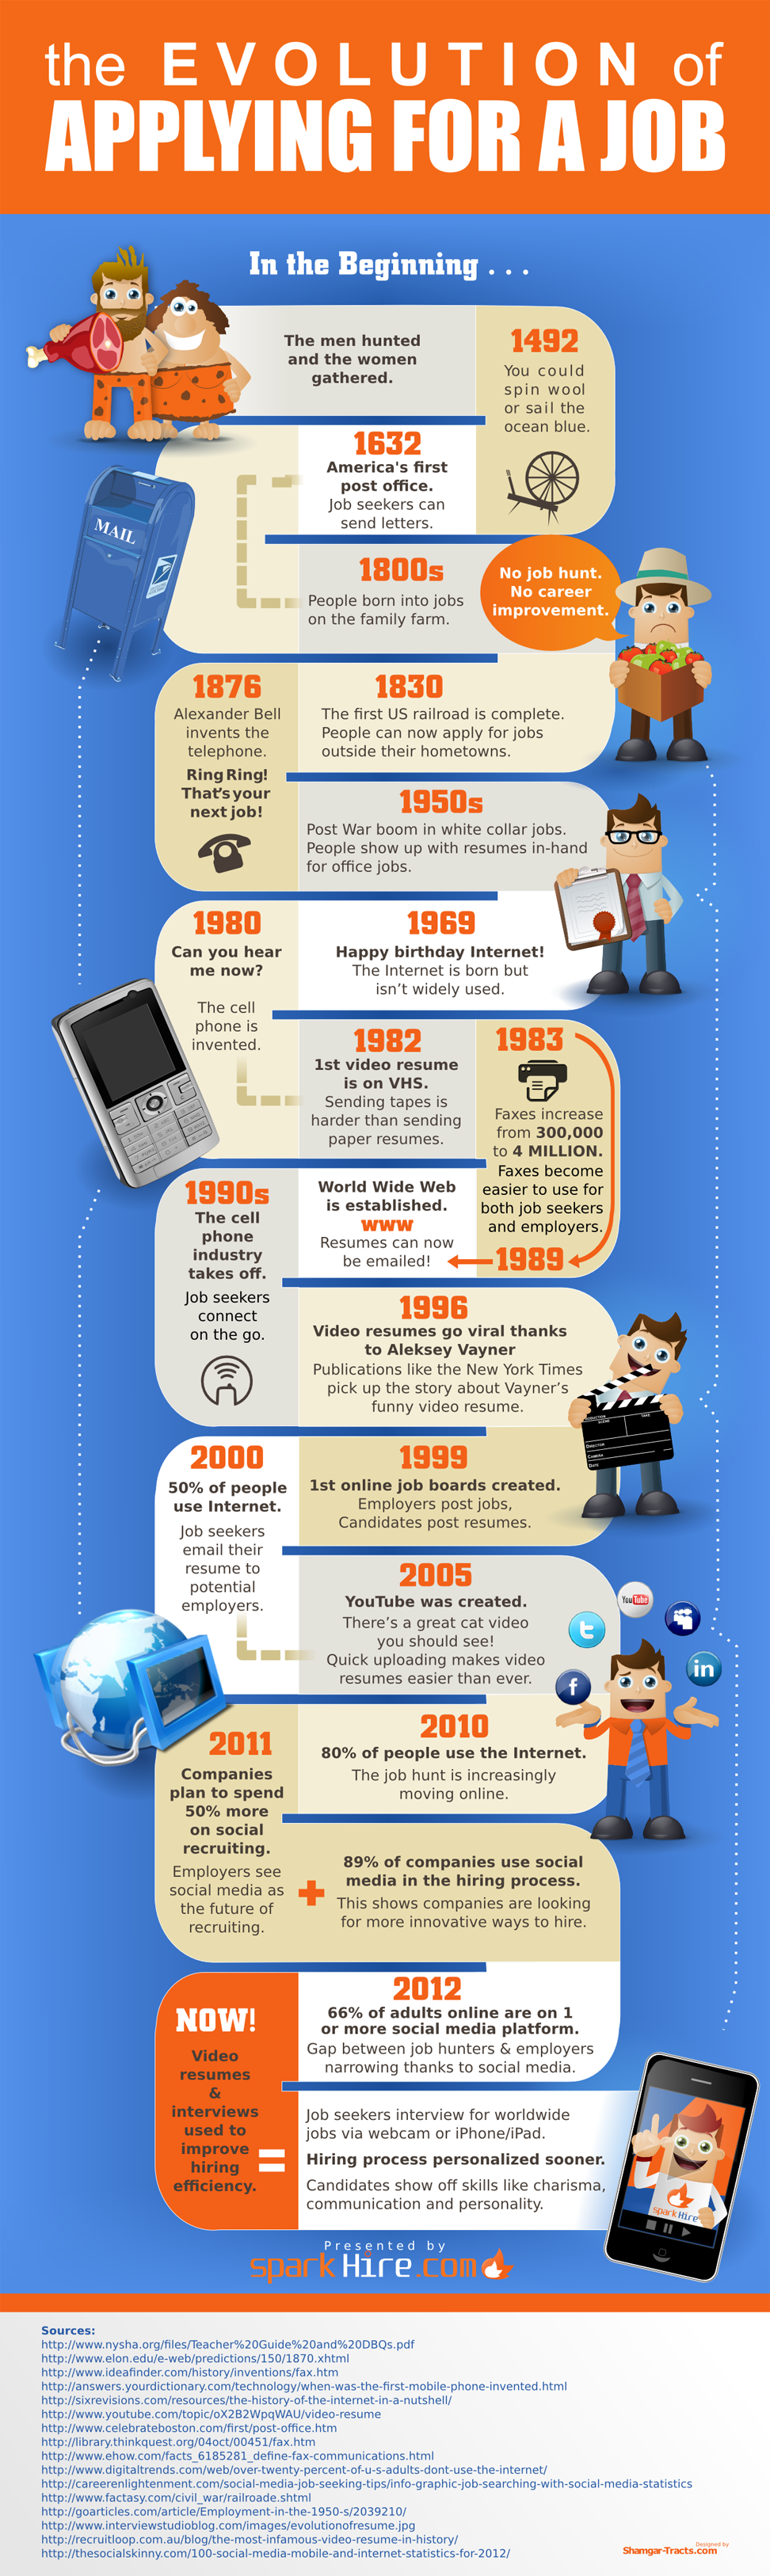 Evolution of Applying for a Job Infographic